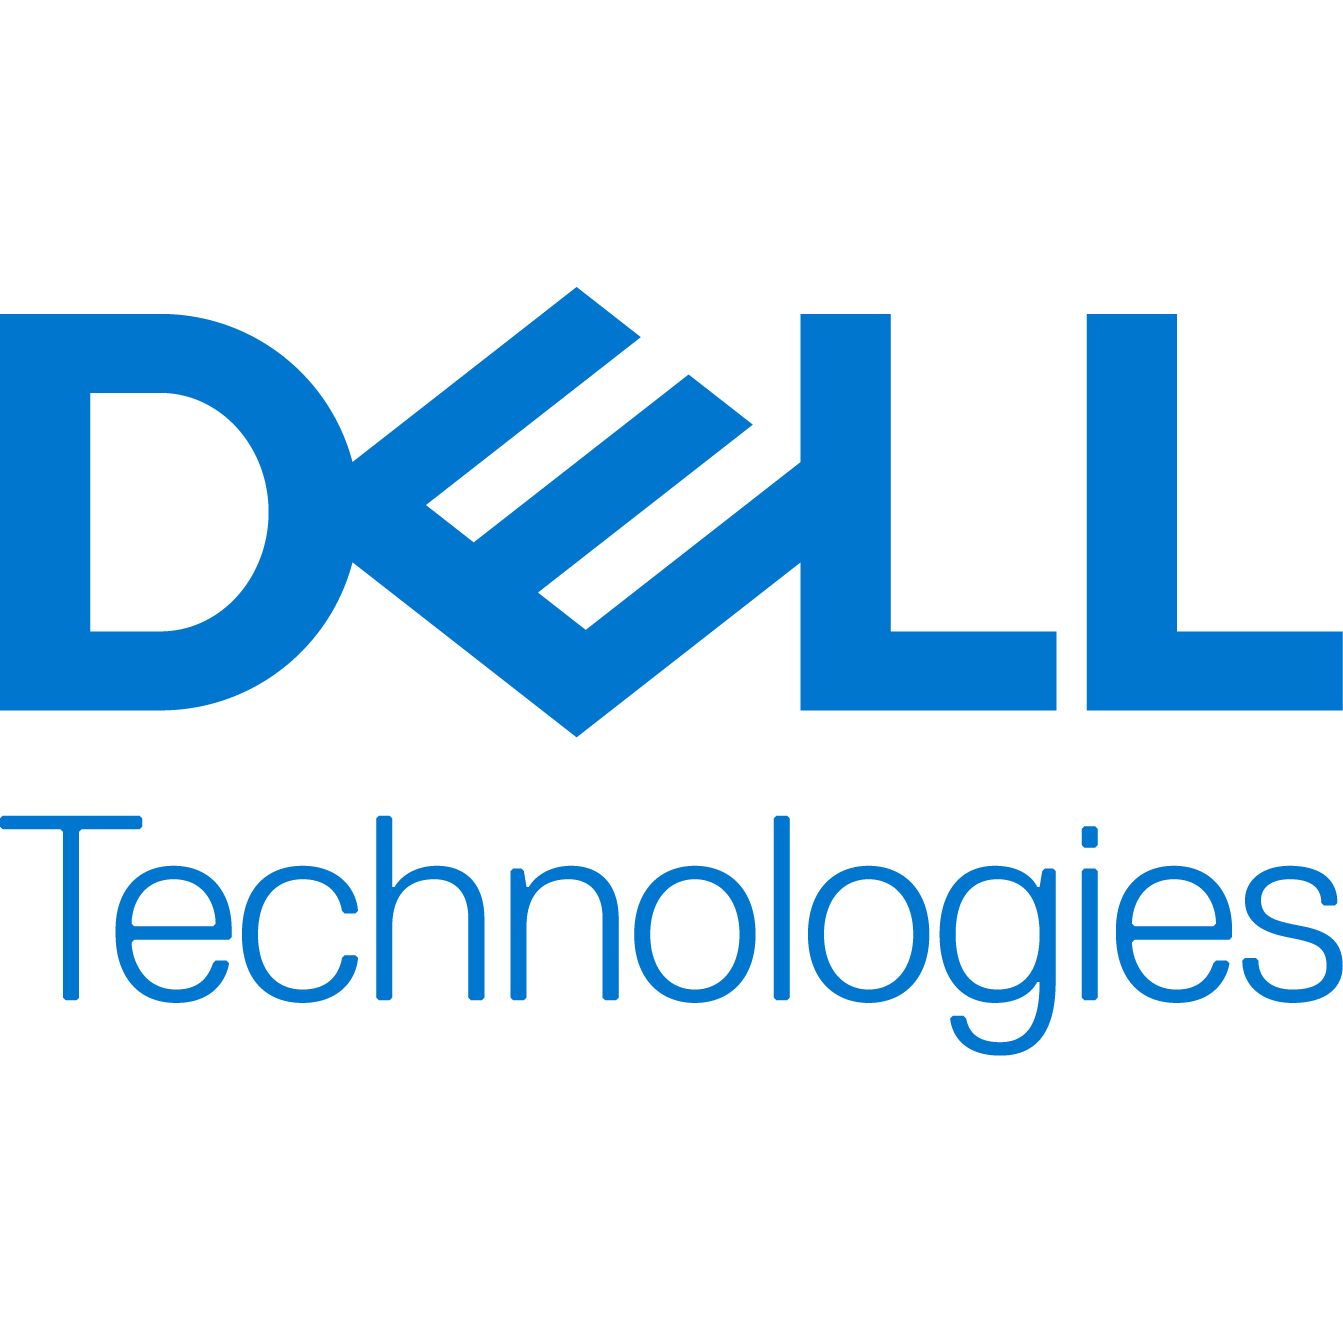 Dell Refurbished has Coupons for Additional Savings on Select Laptops $349